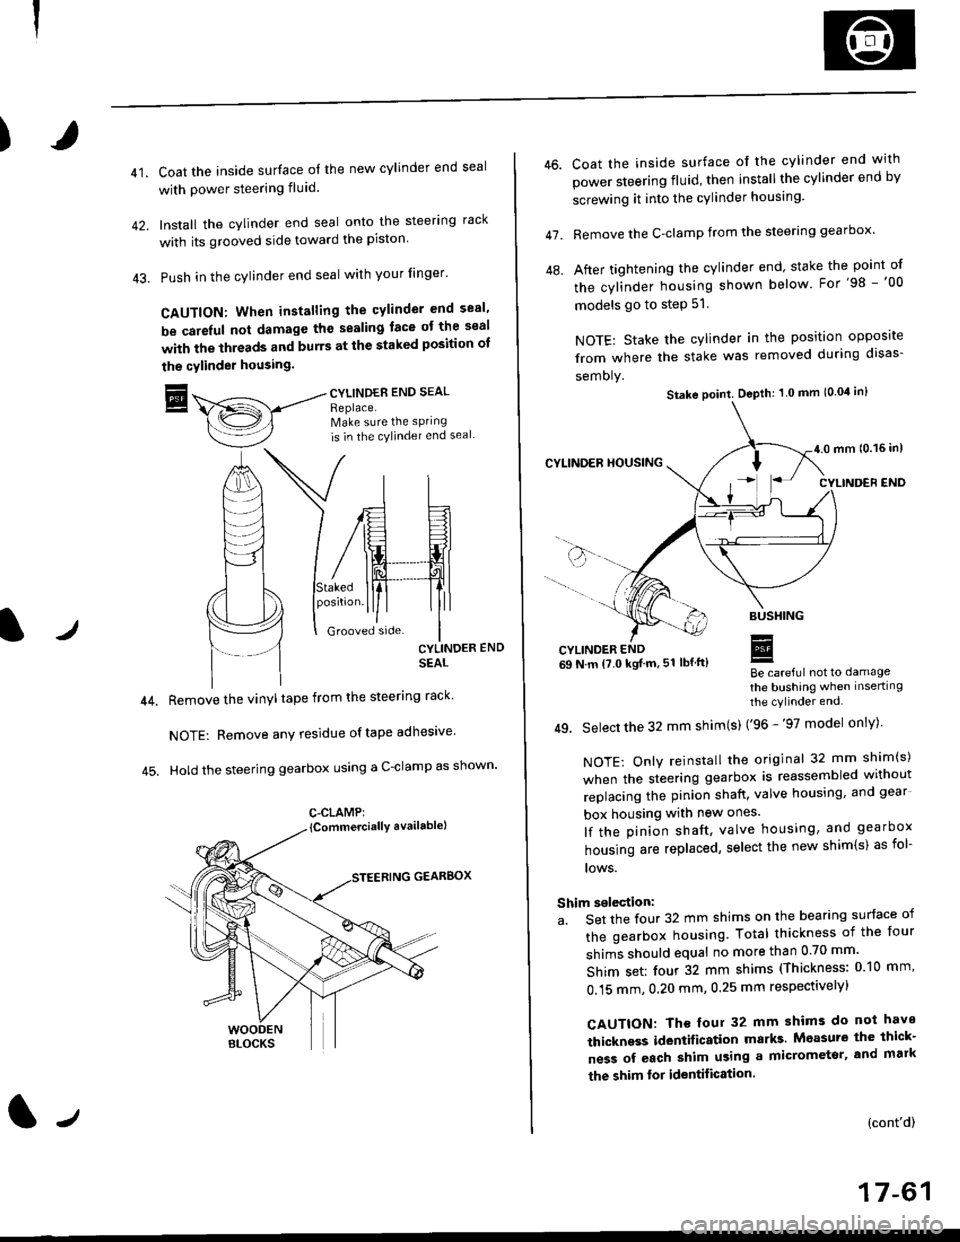 HONDA CIVIC 1996 6.G Owners Manual )
41.Coat the inside surface of the new cylinder end seal
with power steering fluid.
Install the cylinder end seal onto the steering rack
with its grooved side toward the piston
Push in the cylinder 